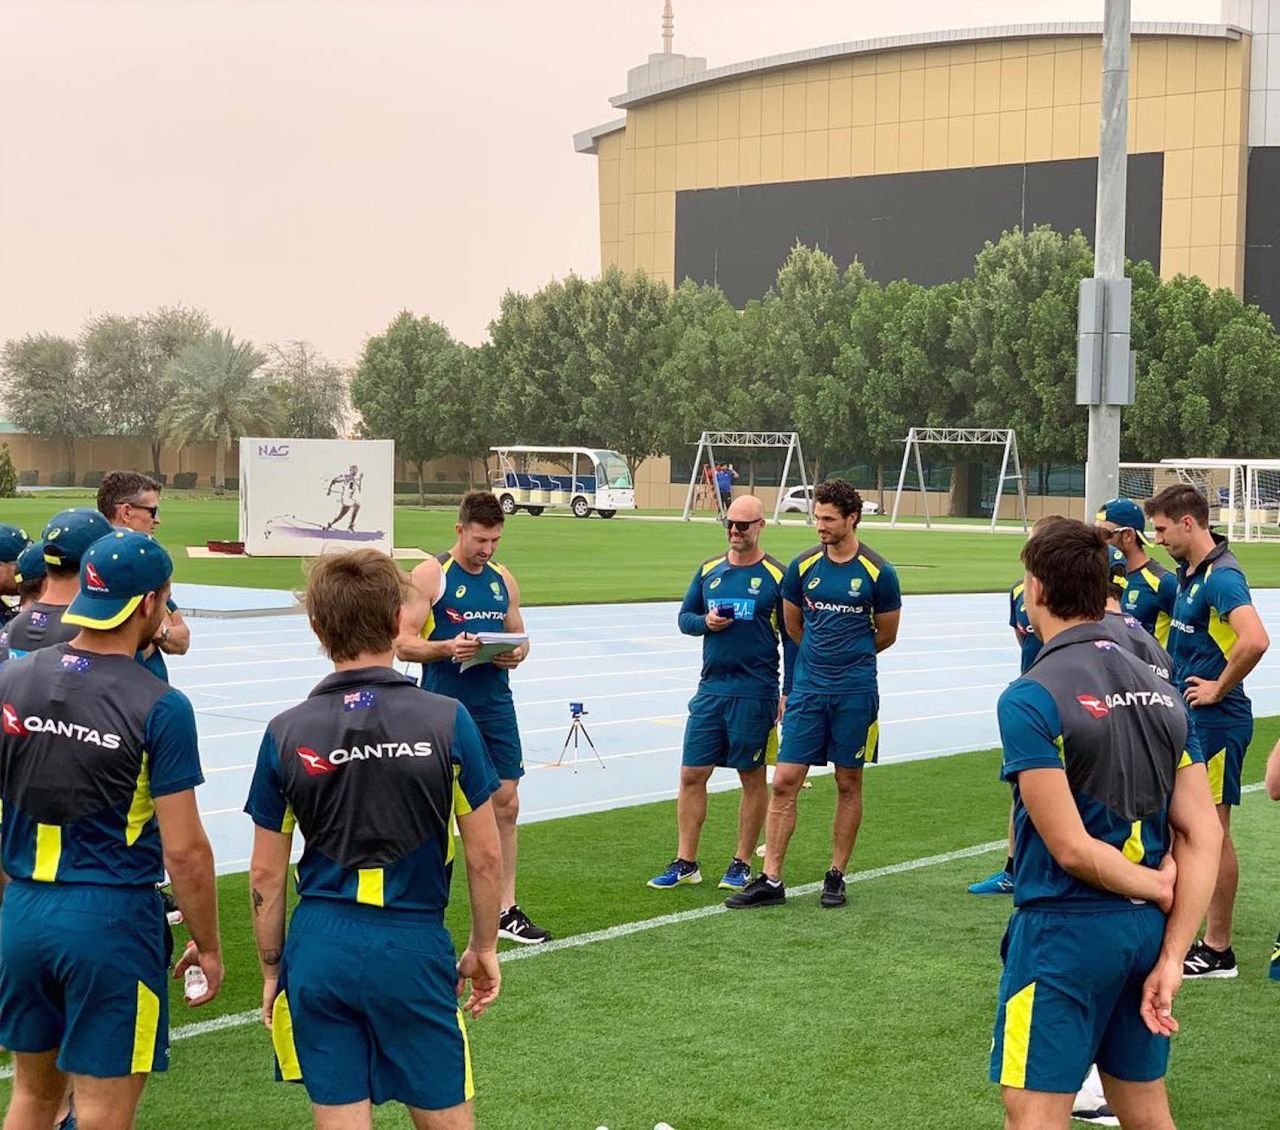 The Australian cricket team going through their final tests and preparations on 17 March, ahead of the World Cup in England.